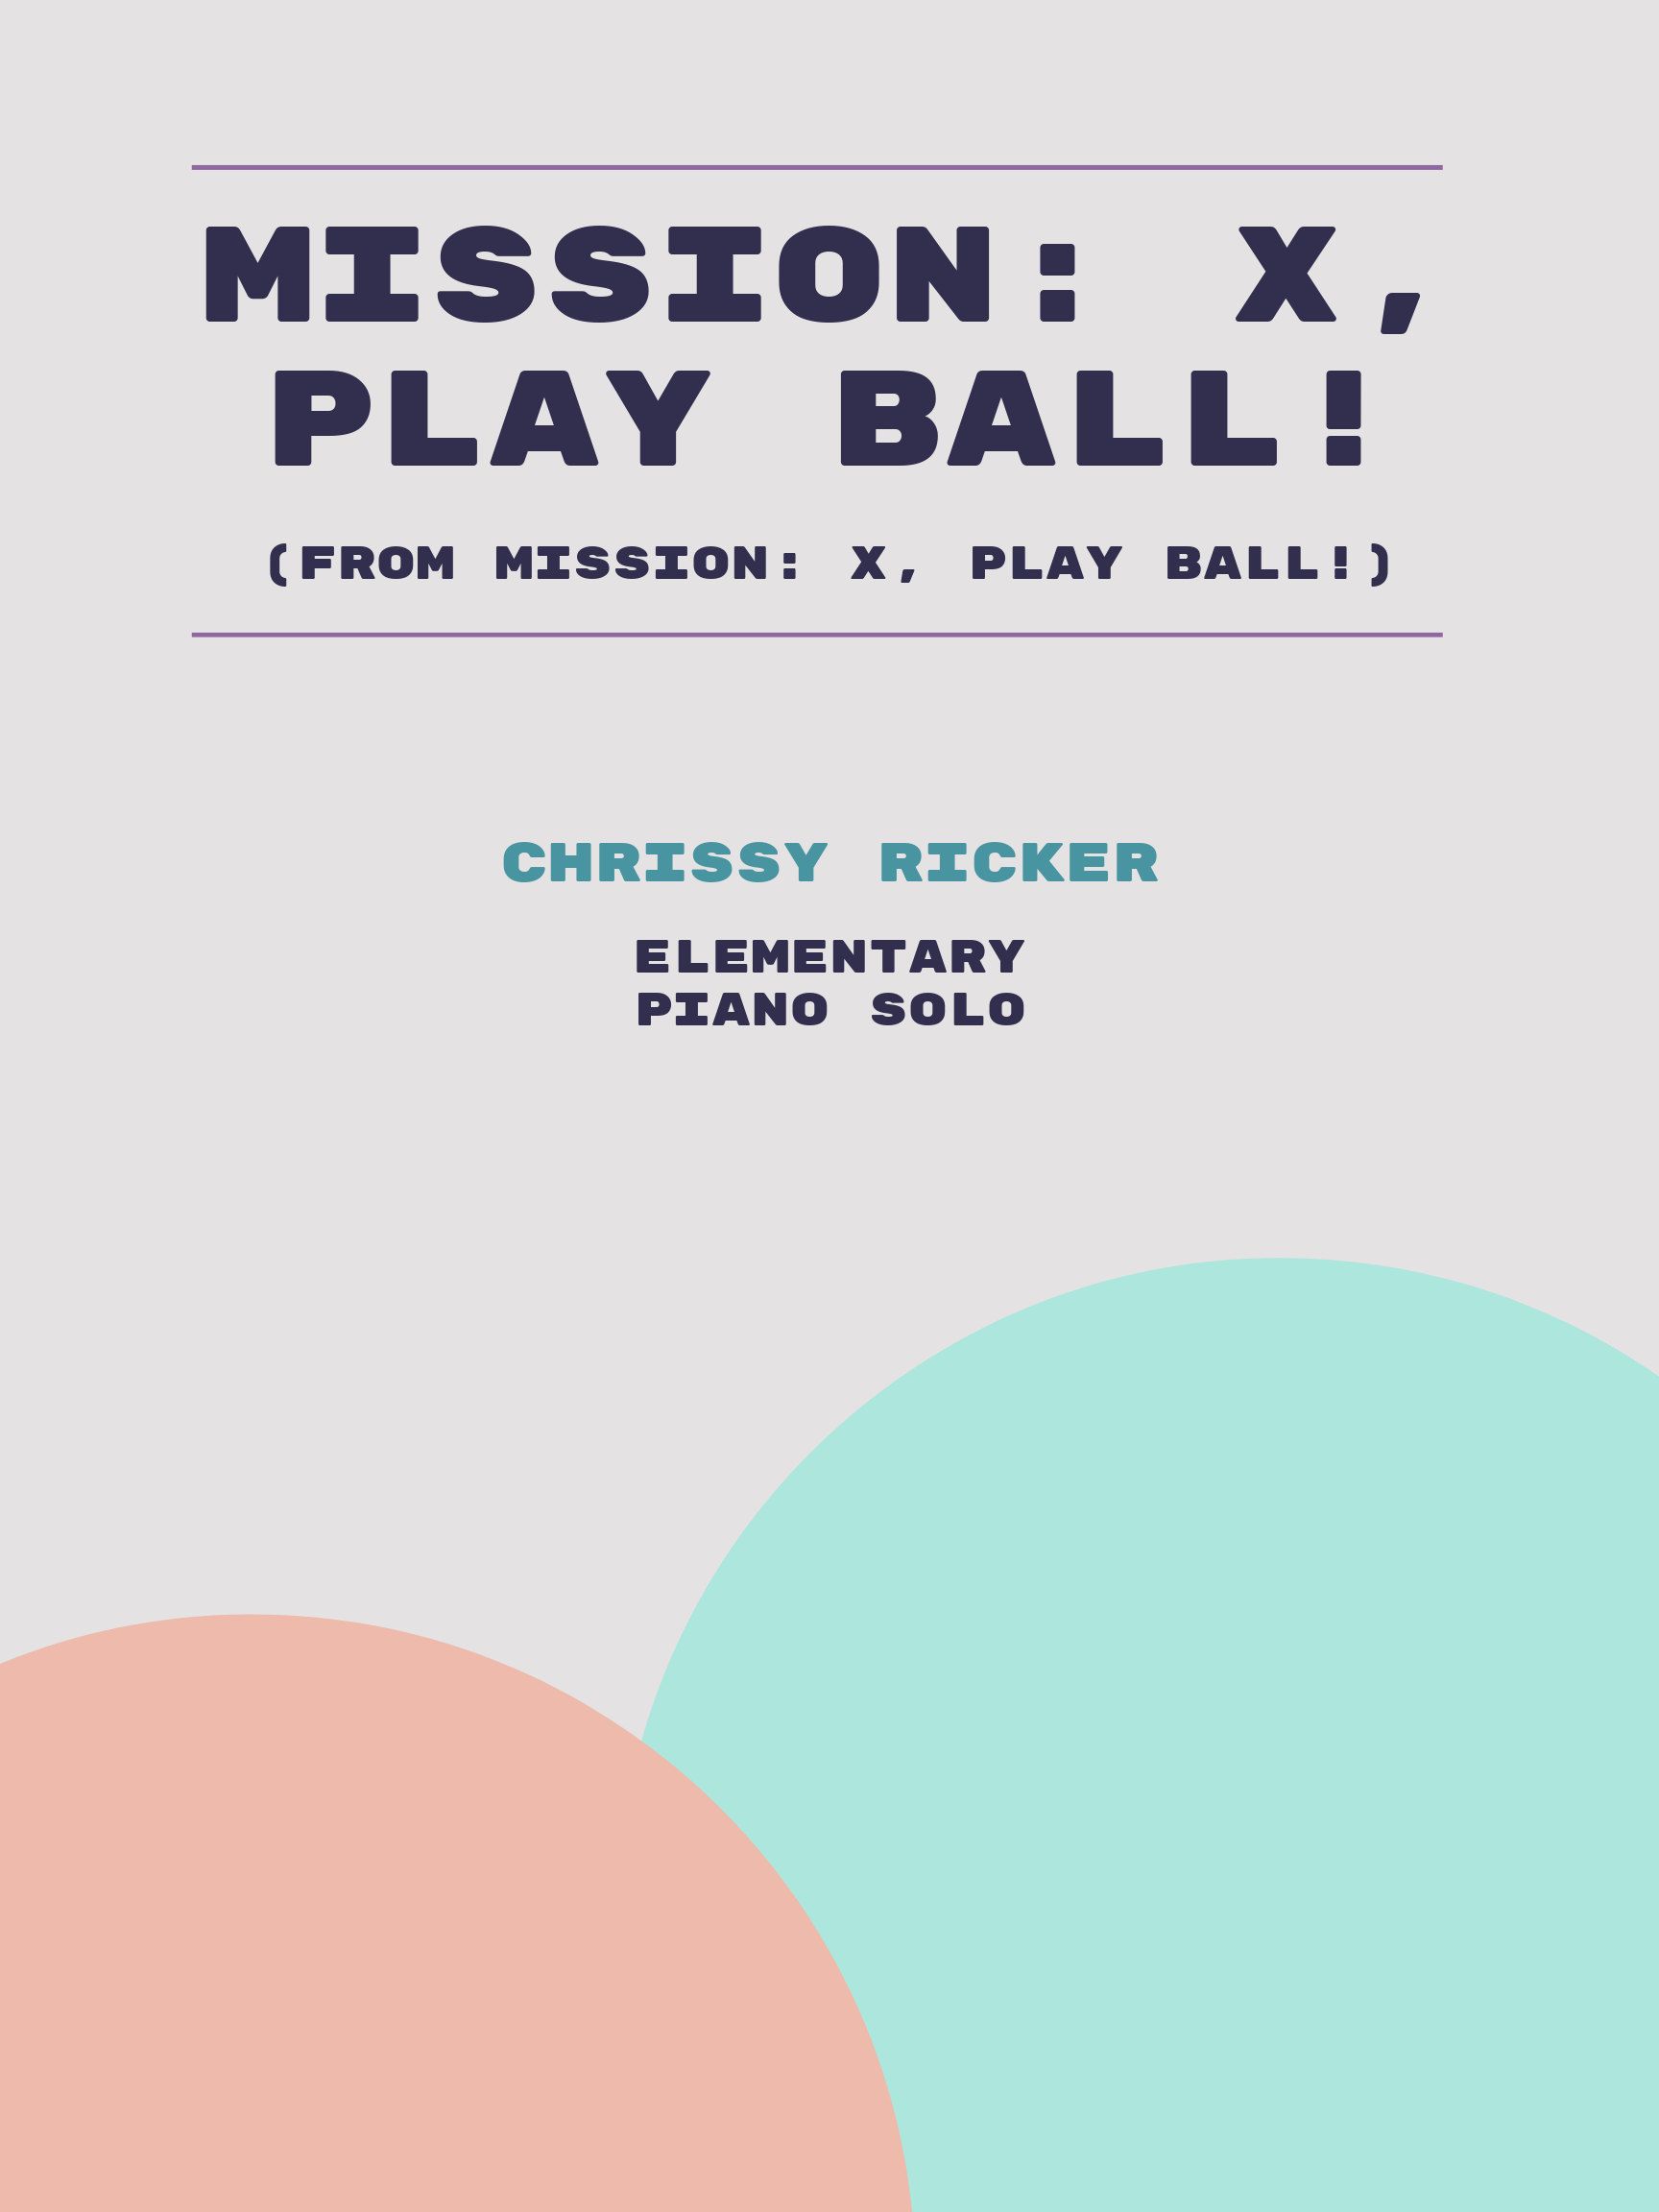 Mission: X, Play Ball! by Chrissy Ricker